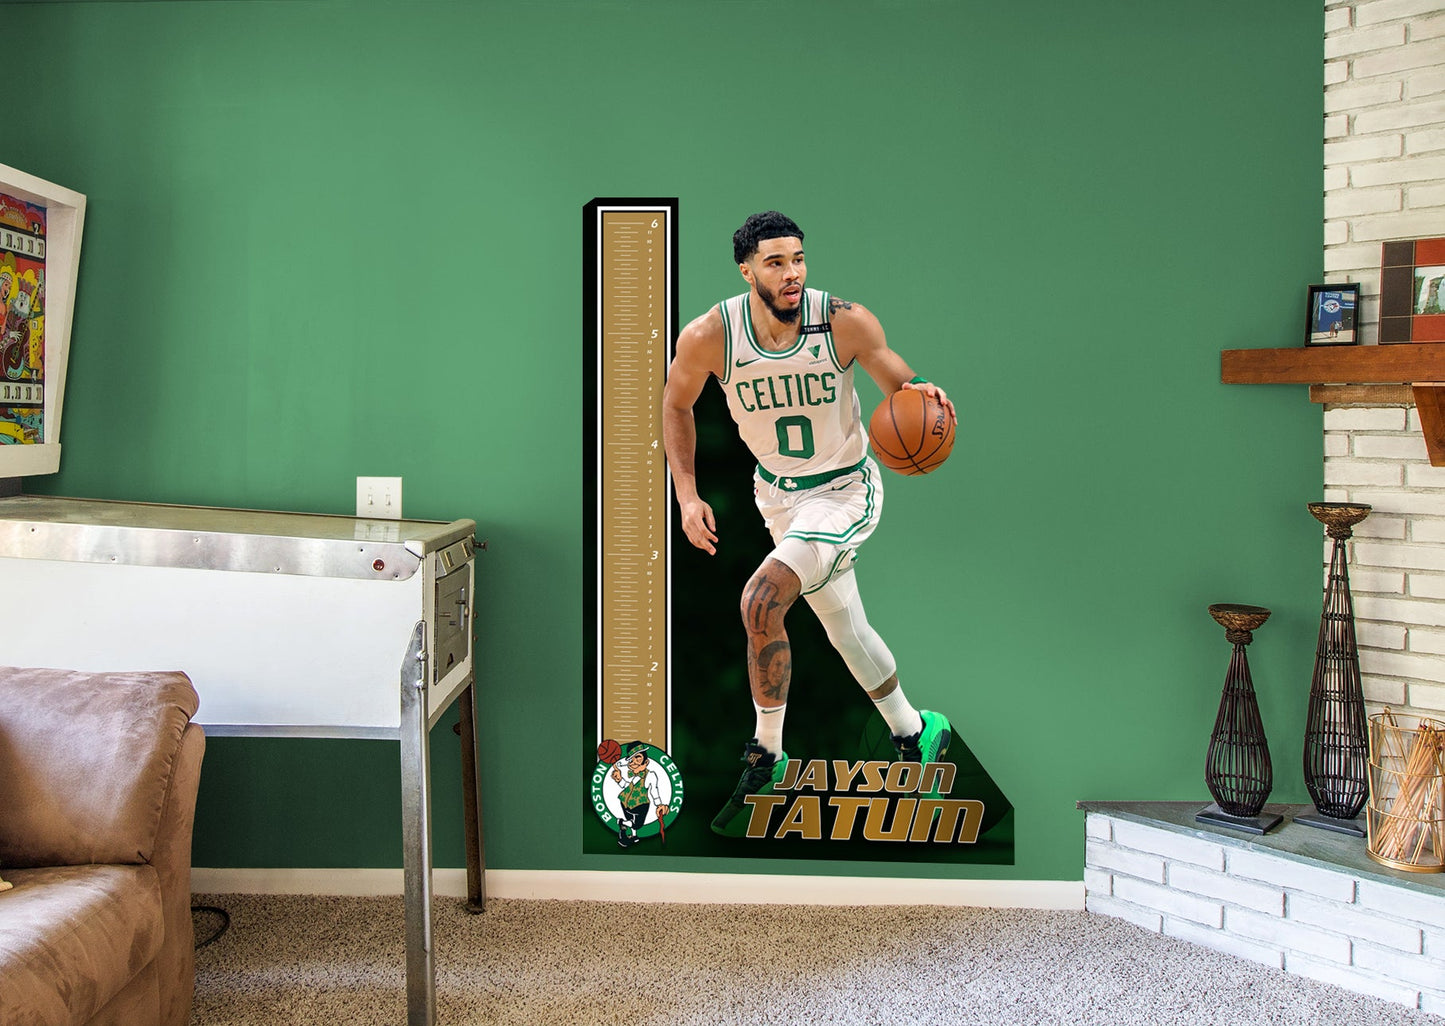 Boston Celtics: Jayson Tatum  Growth Chart        - Officially Licensed NBA Removable Wall   Adhesive Decal